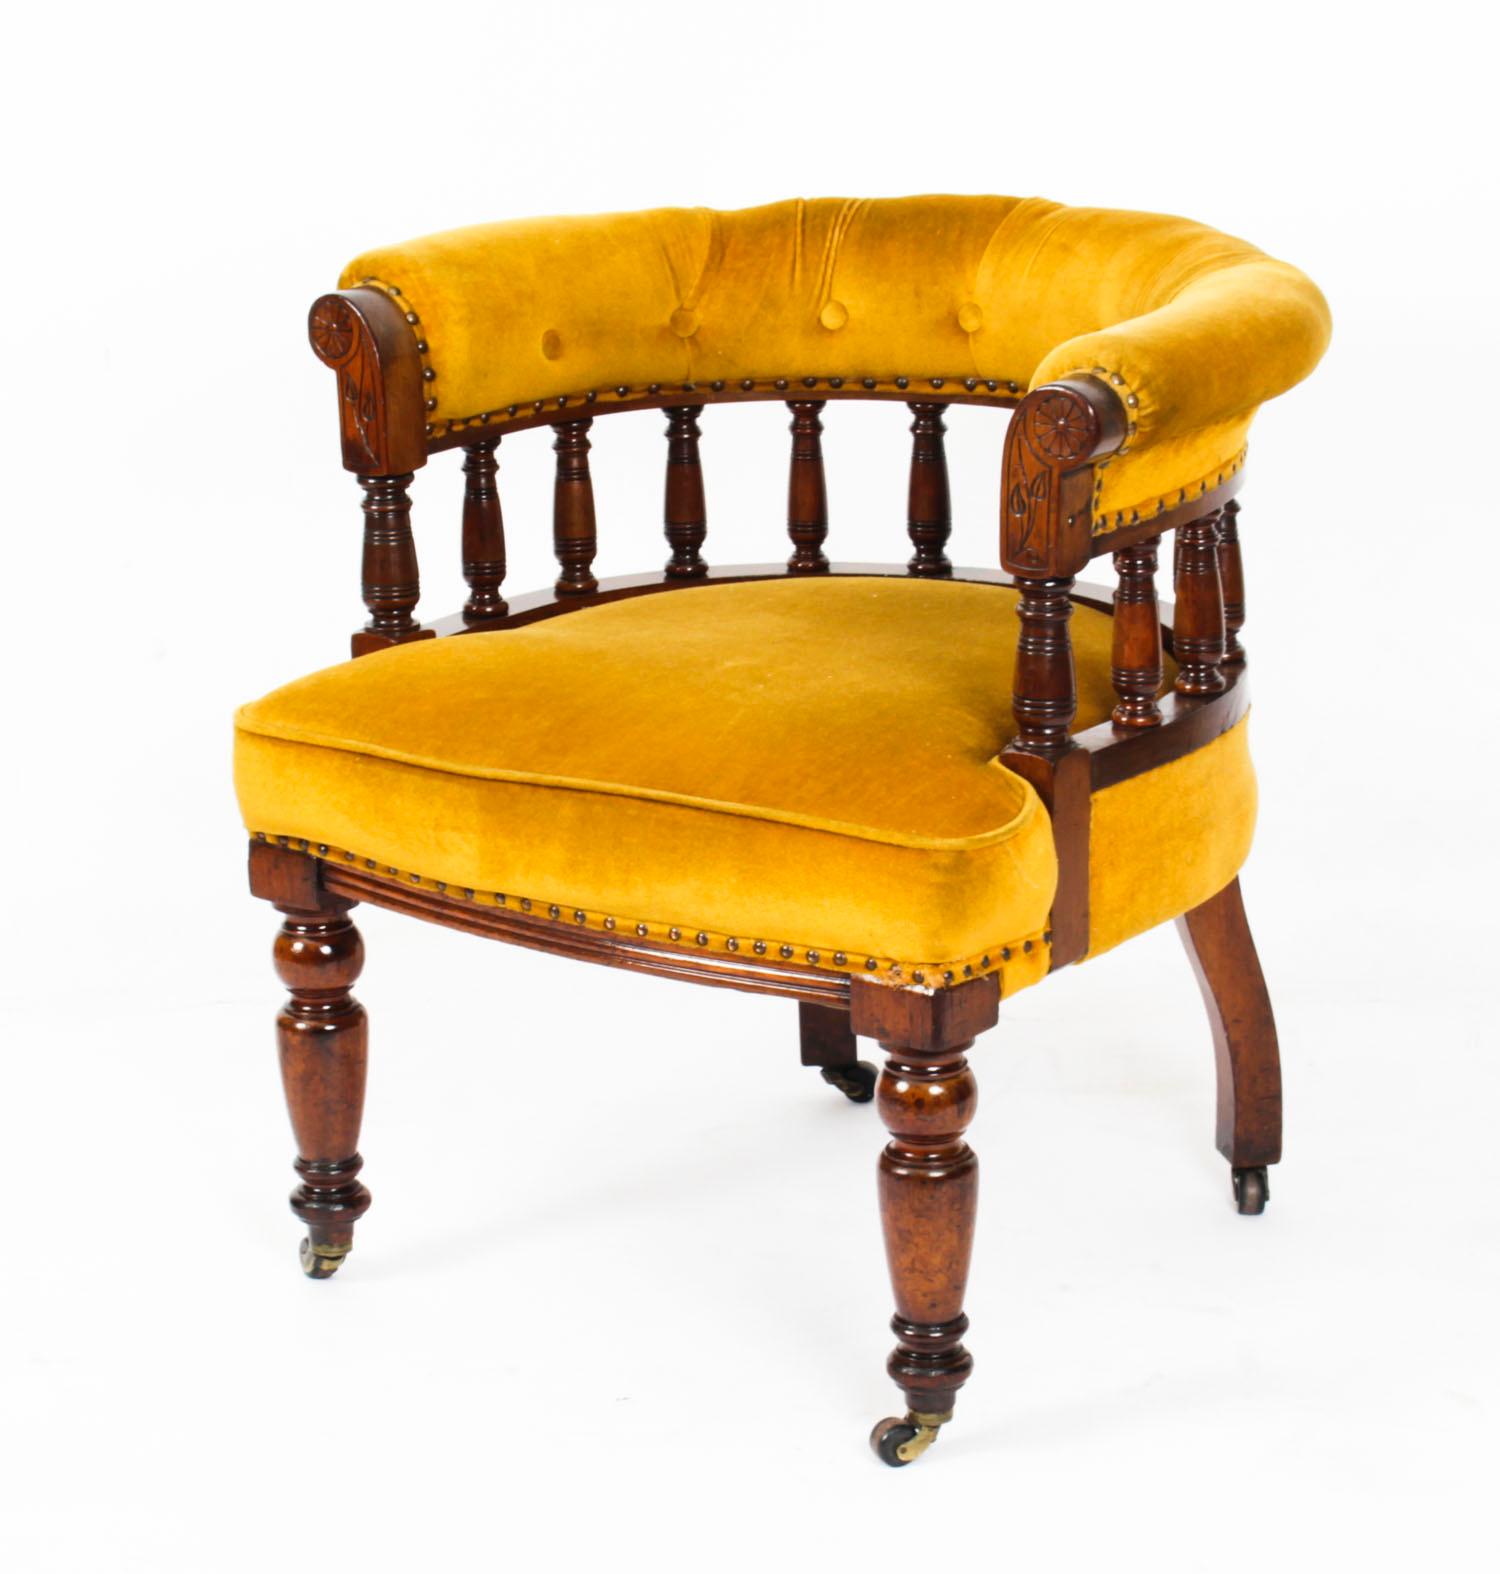 An elegant Victorian walnut and gold velvet upholstered desk chair circa 1880 in date.
 
This comfortable chair features a padded crest shaped back-rail on a turned spindle gallery with an overstuffed seat on further turned legs with brass and